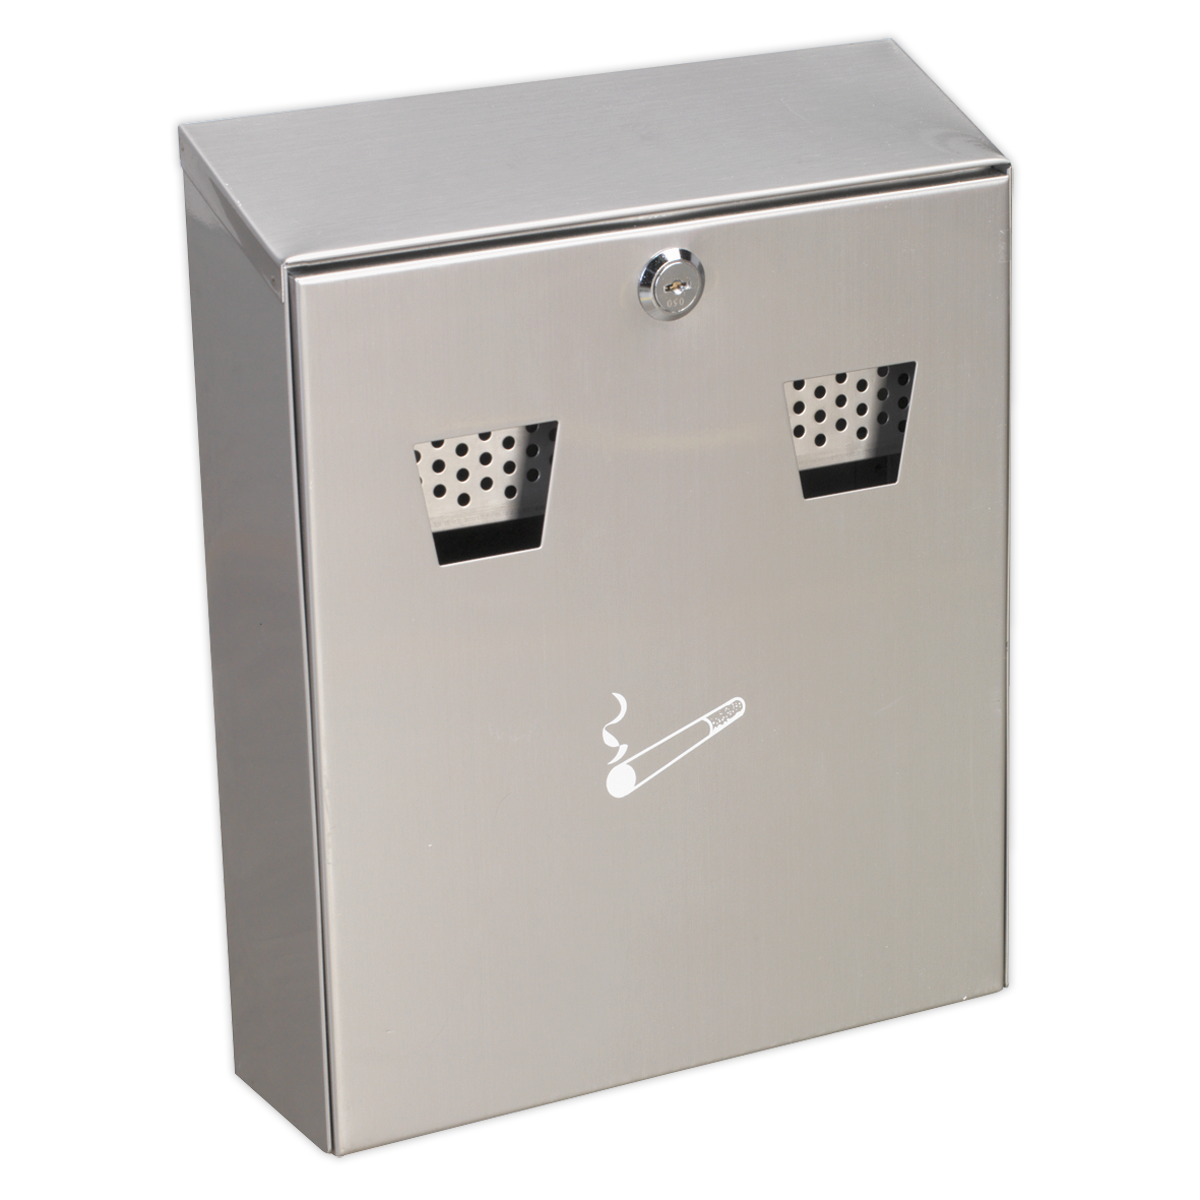 Cigarette Bin Wall-Mounting Stainless Steel - RCB02 - Farming Parts